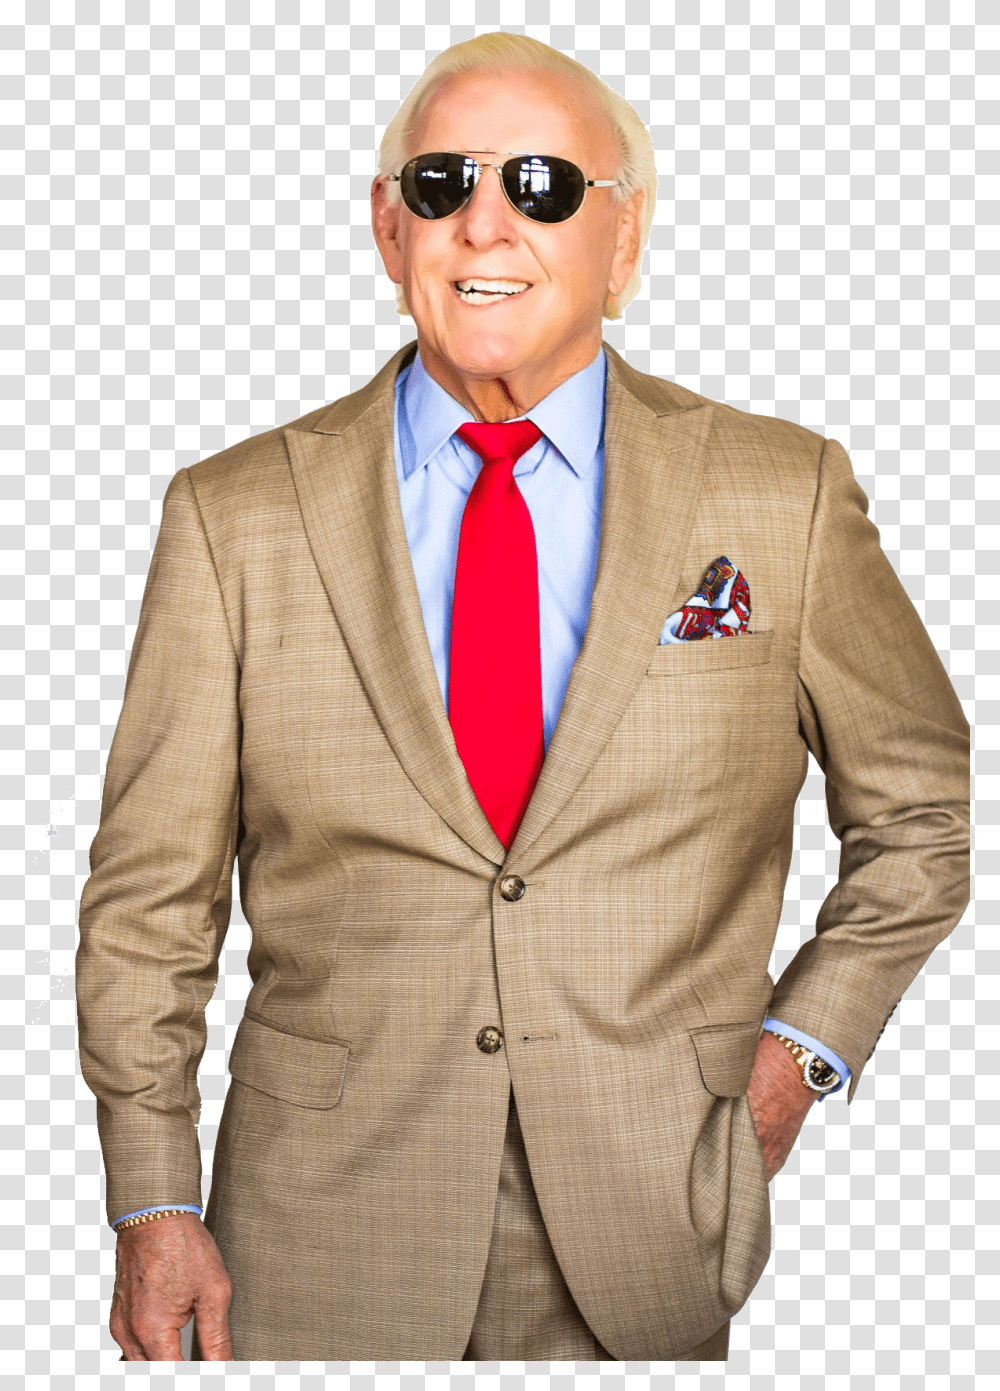 Ric Flair In Suit Download Wwe Ric Flair Suit, Tie, Accessories, Accessory, Sunglasses Transparent Png